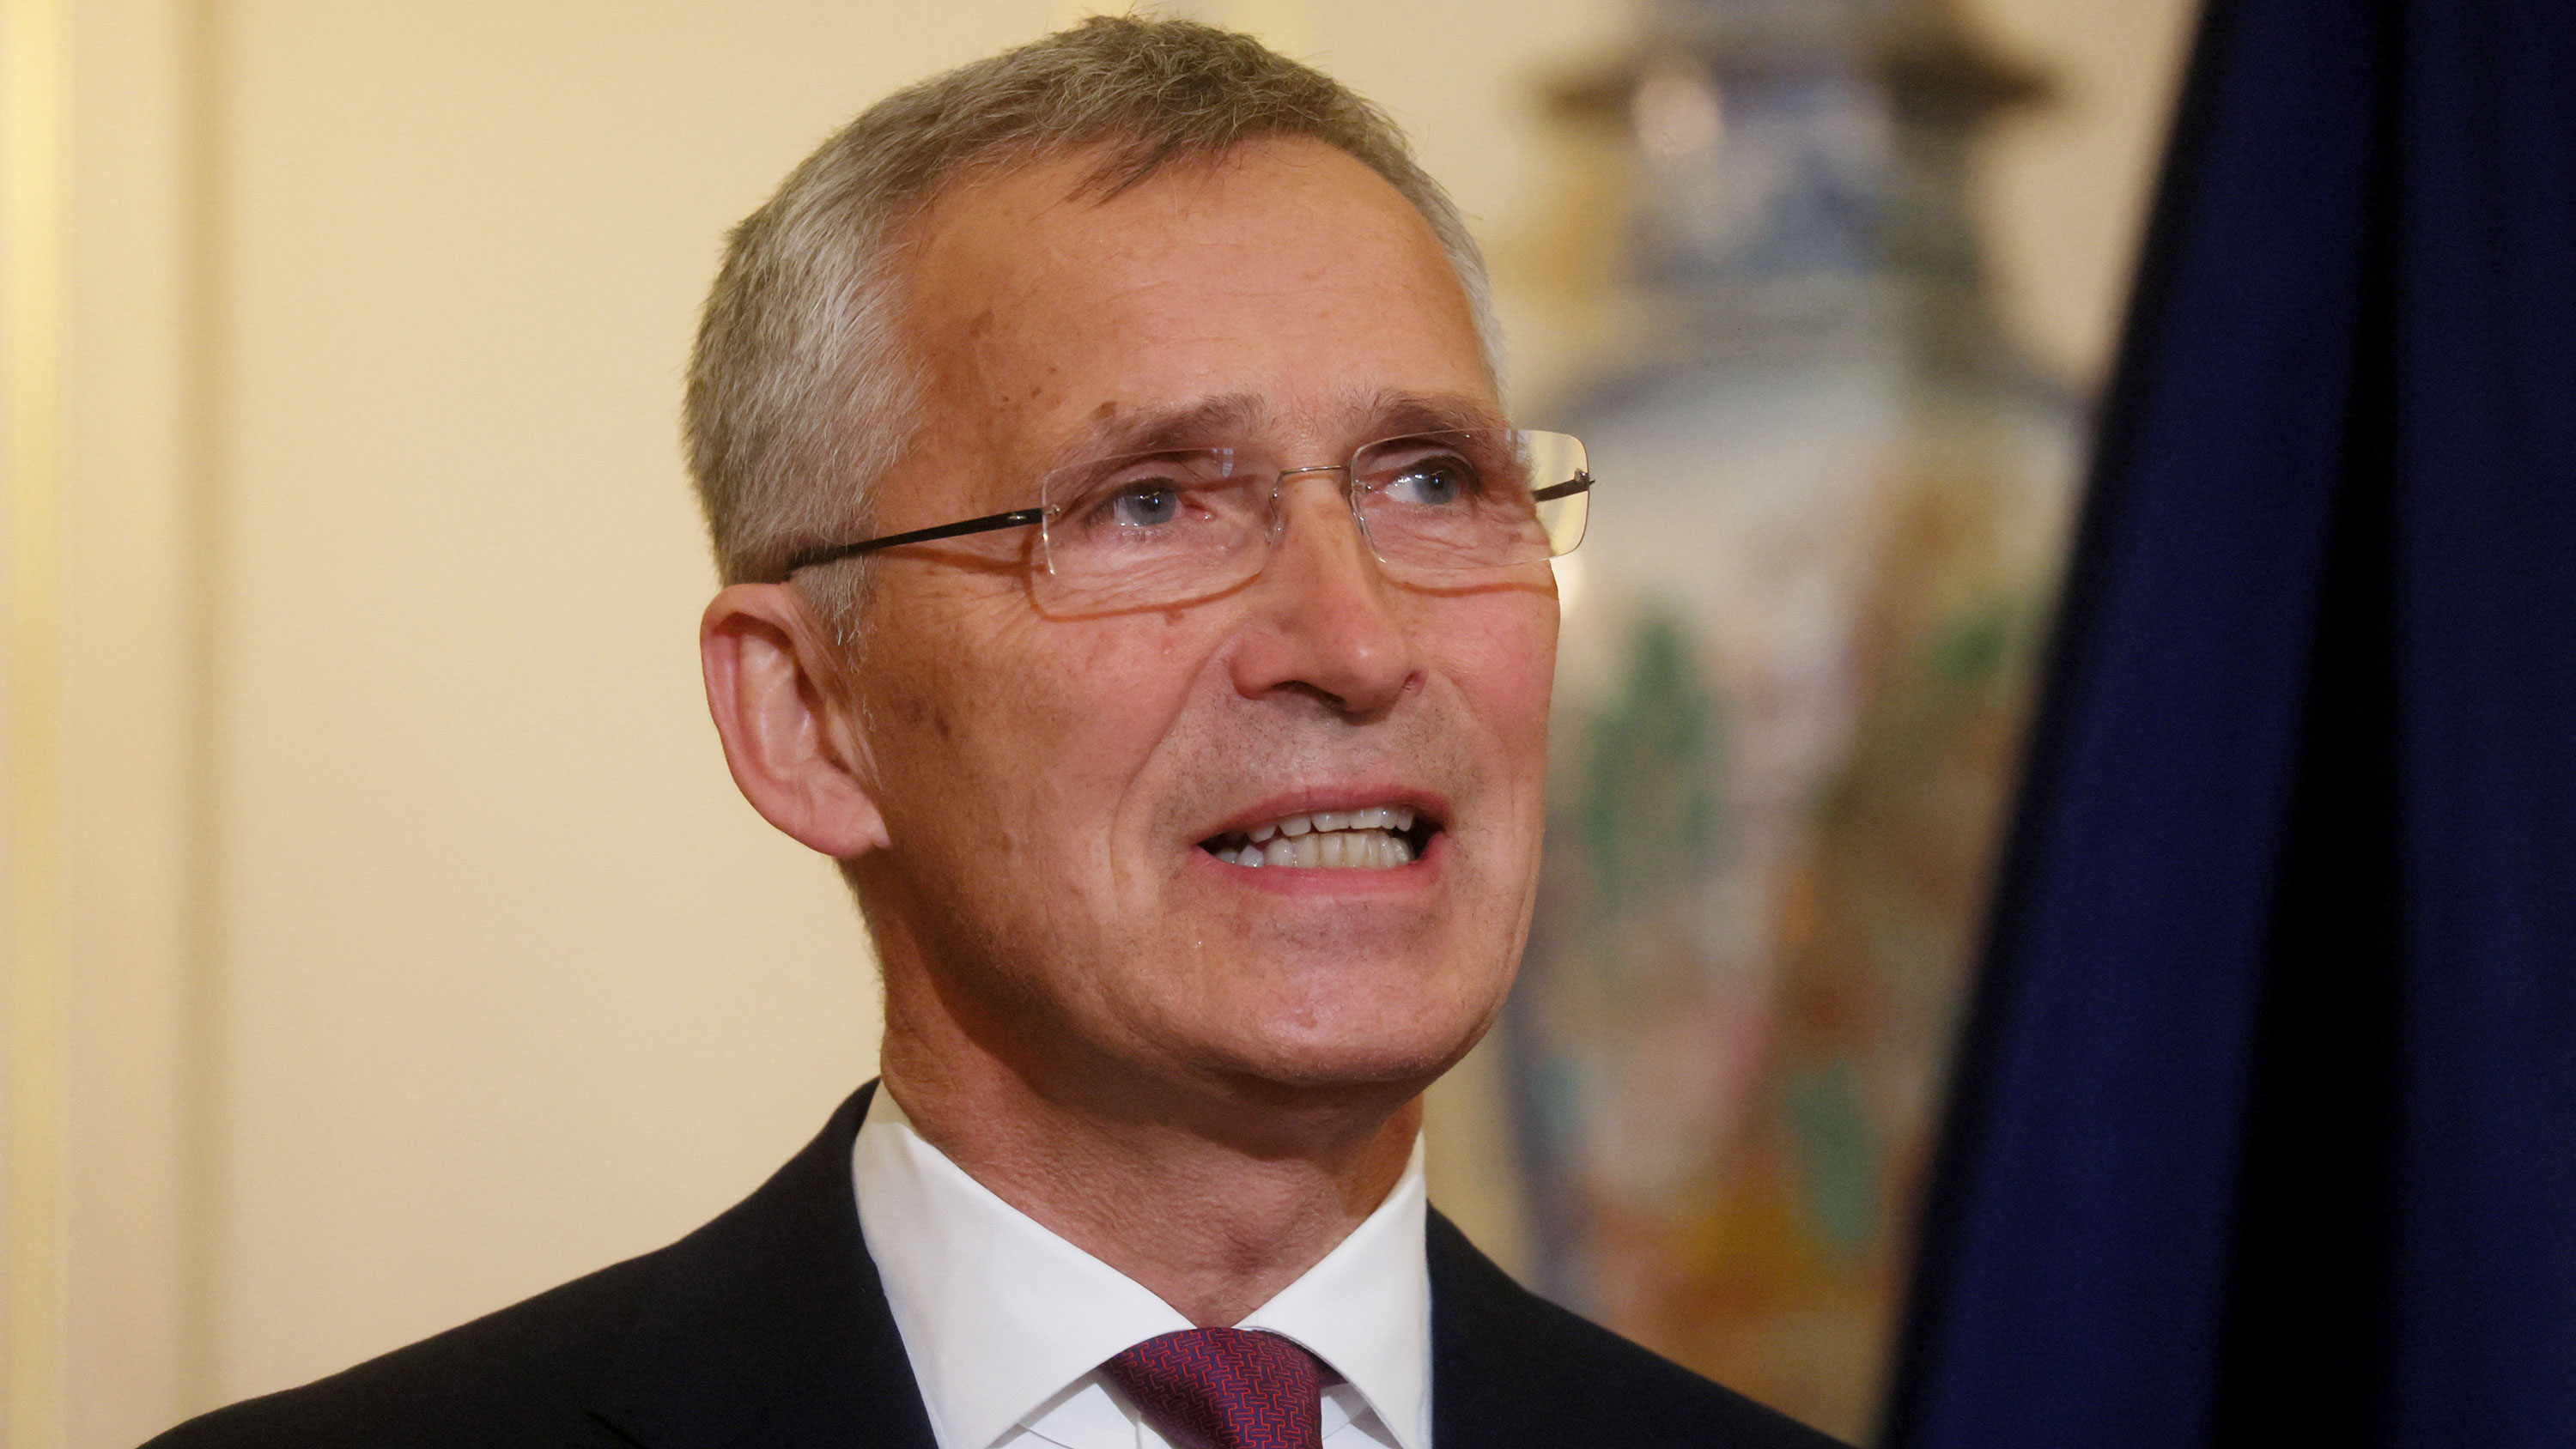 NATO Secretary-General Jens Stoltenberg speaks during a press conference in Washington, DC, on Wednesday.